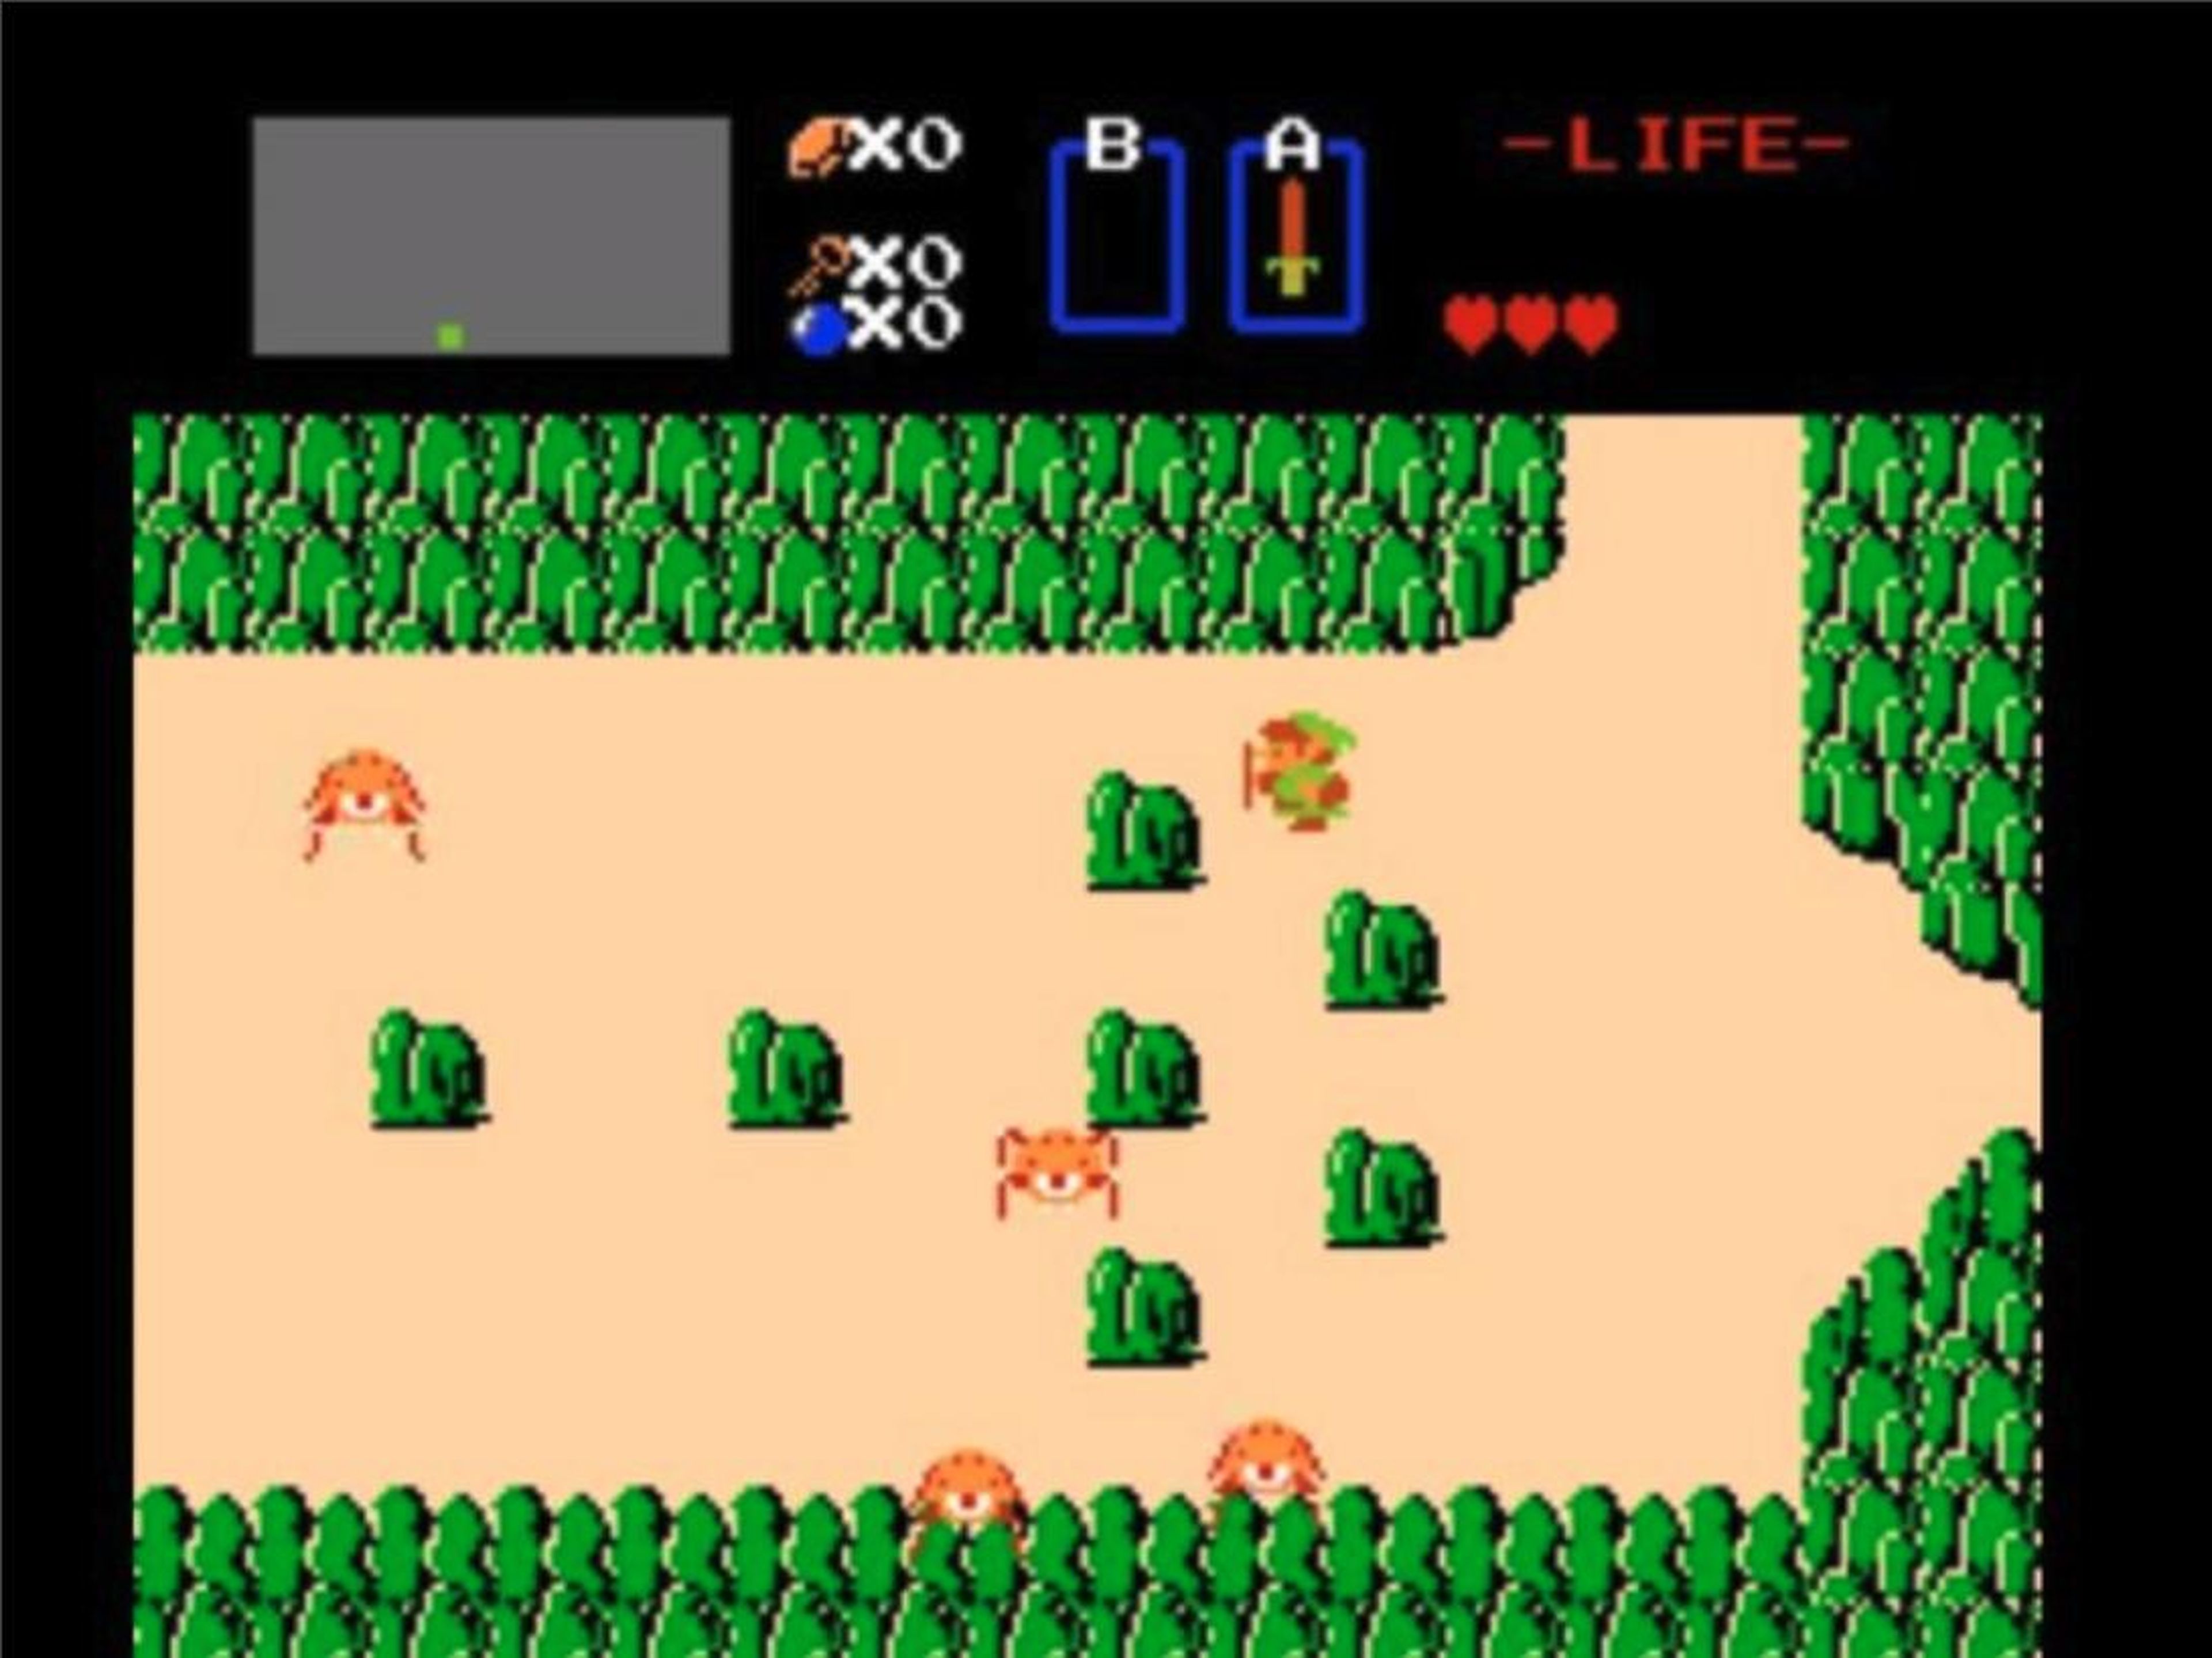 Saving maidens seemed to be the main theme for Nintendo in the ‘80s — the company released “The Legend of Zelda” for NES just a year after Mario made his solo debut. Link, the main character, must travel through forests and